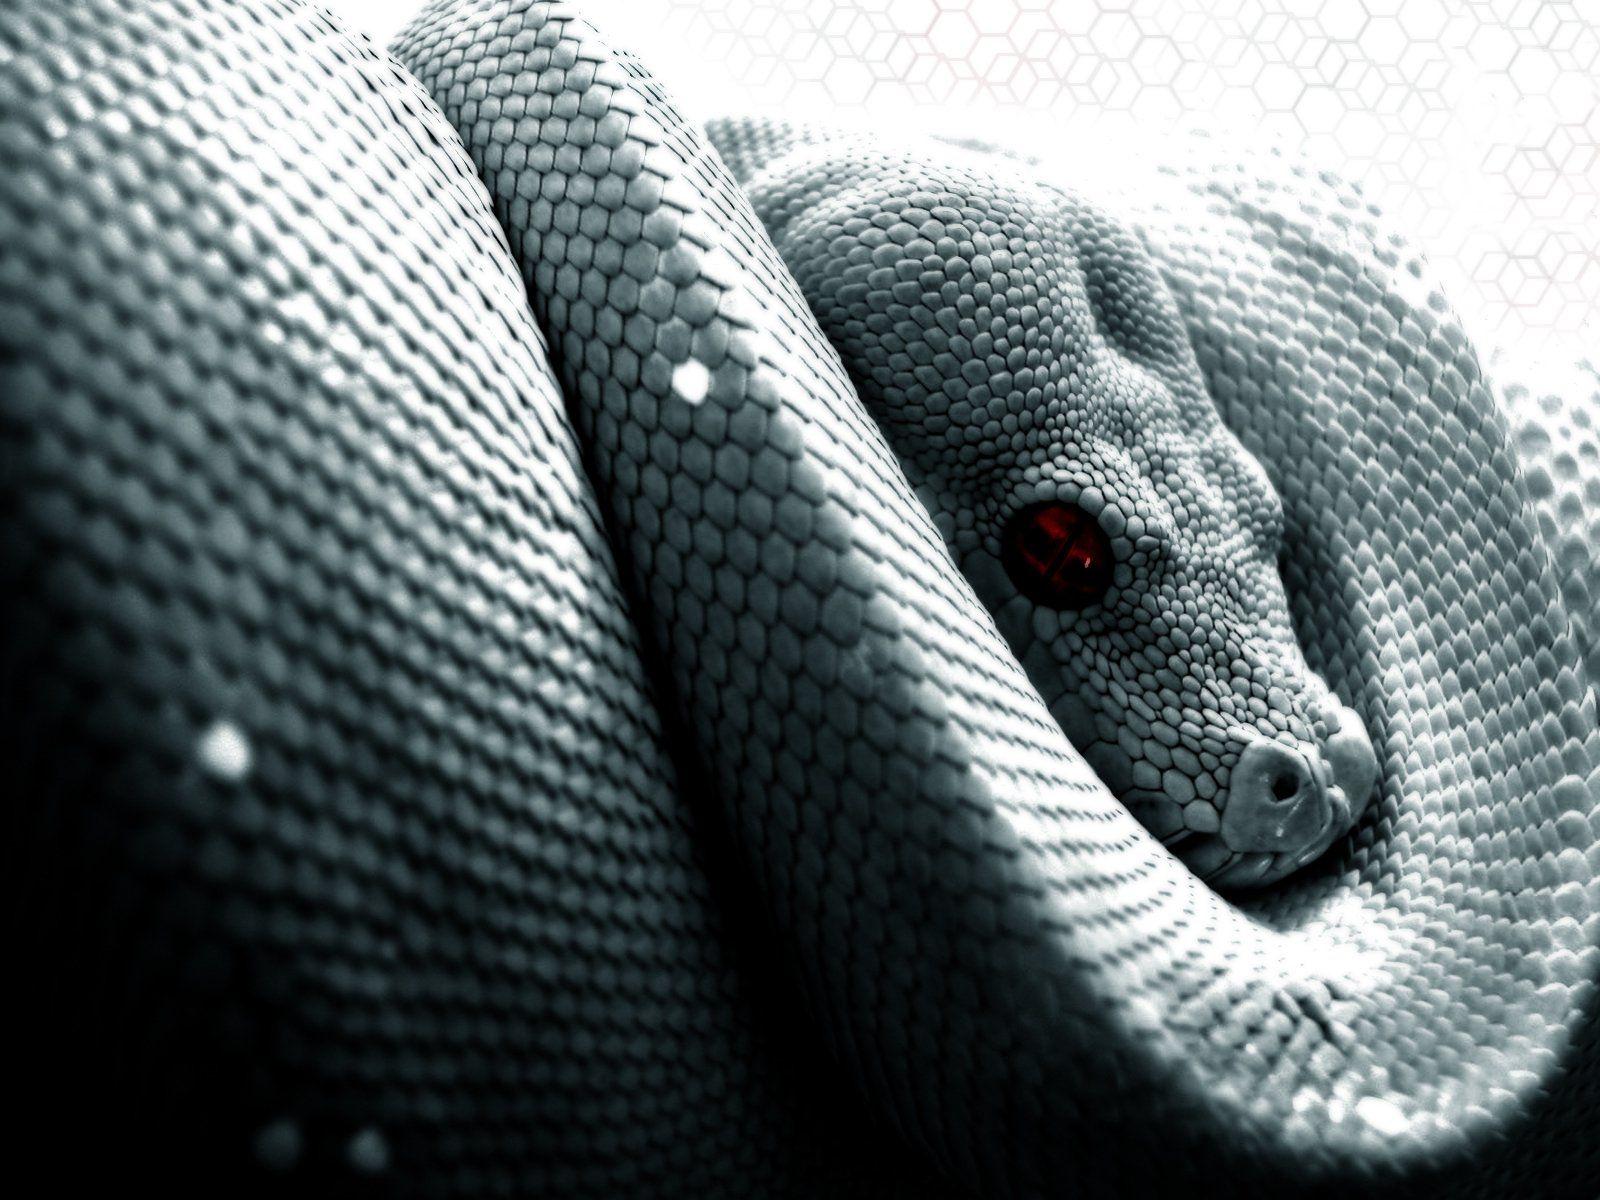 Reptile HD Wallpaper and Background Image